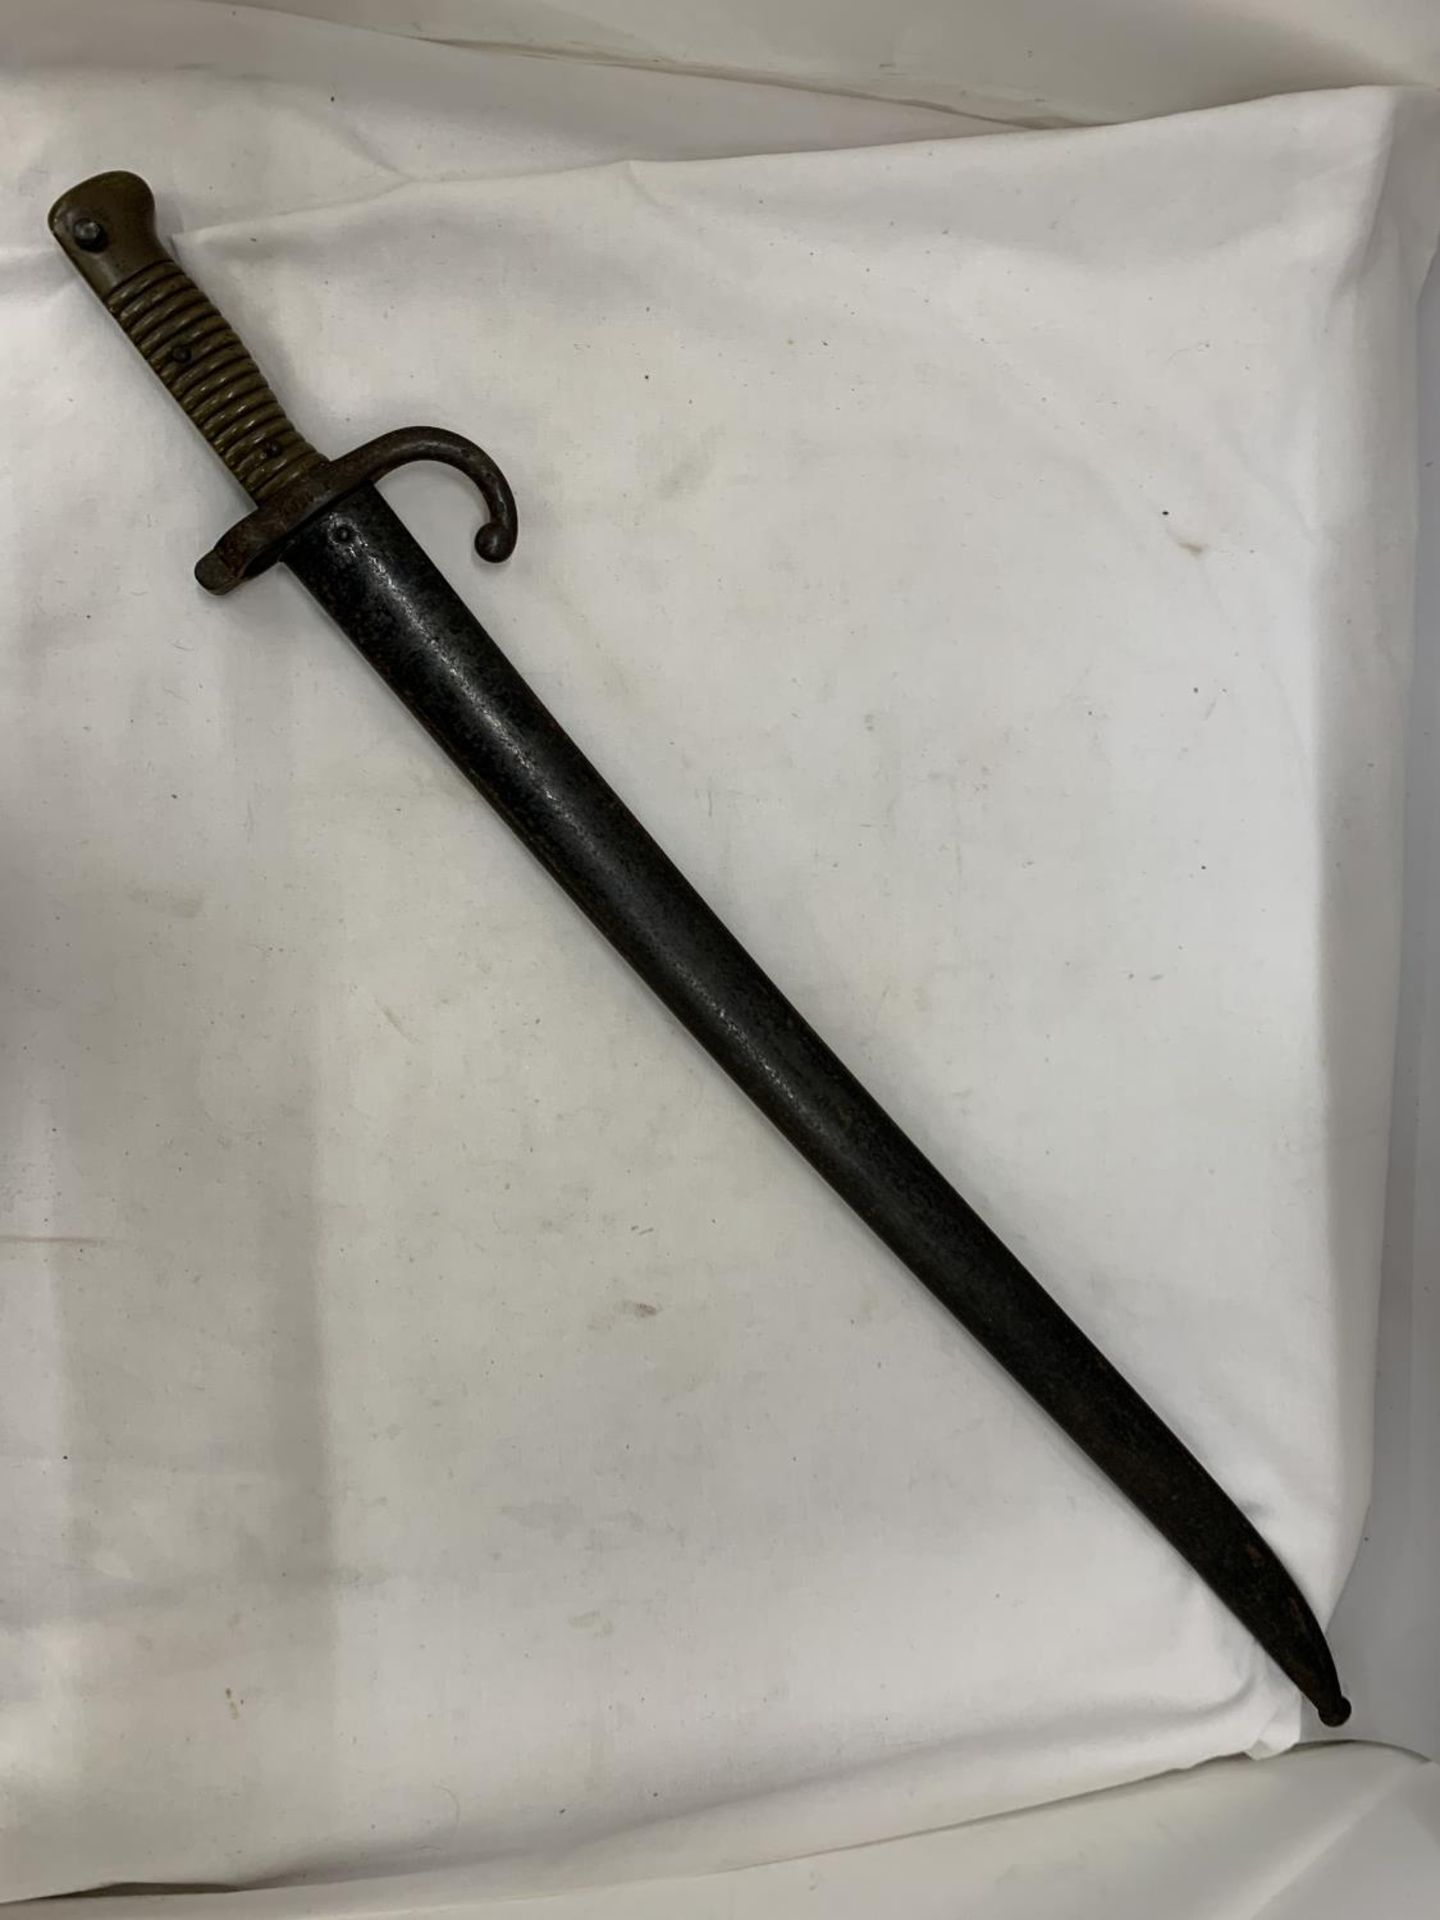 A FRENCH, 1866, CHASSEPOT SWORD/BAYONET